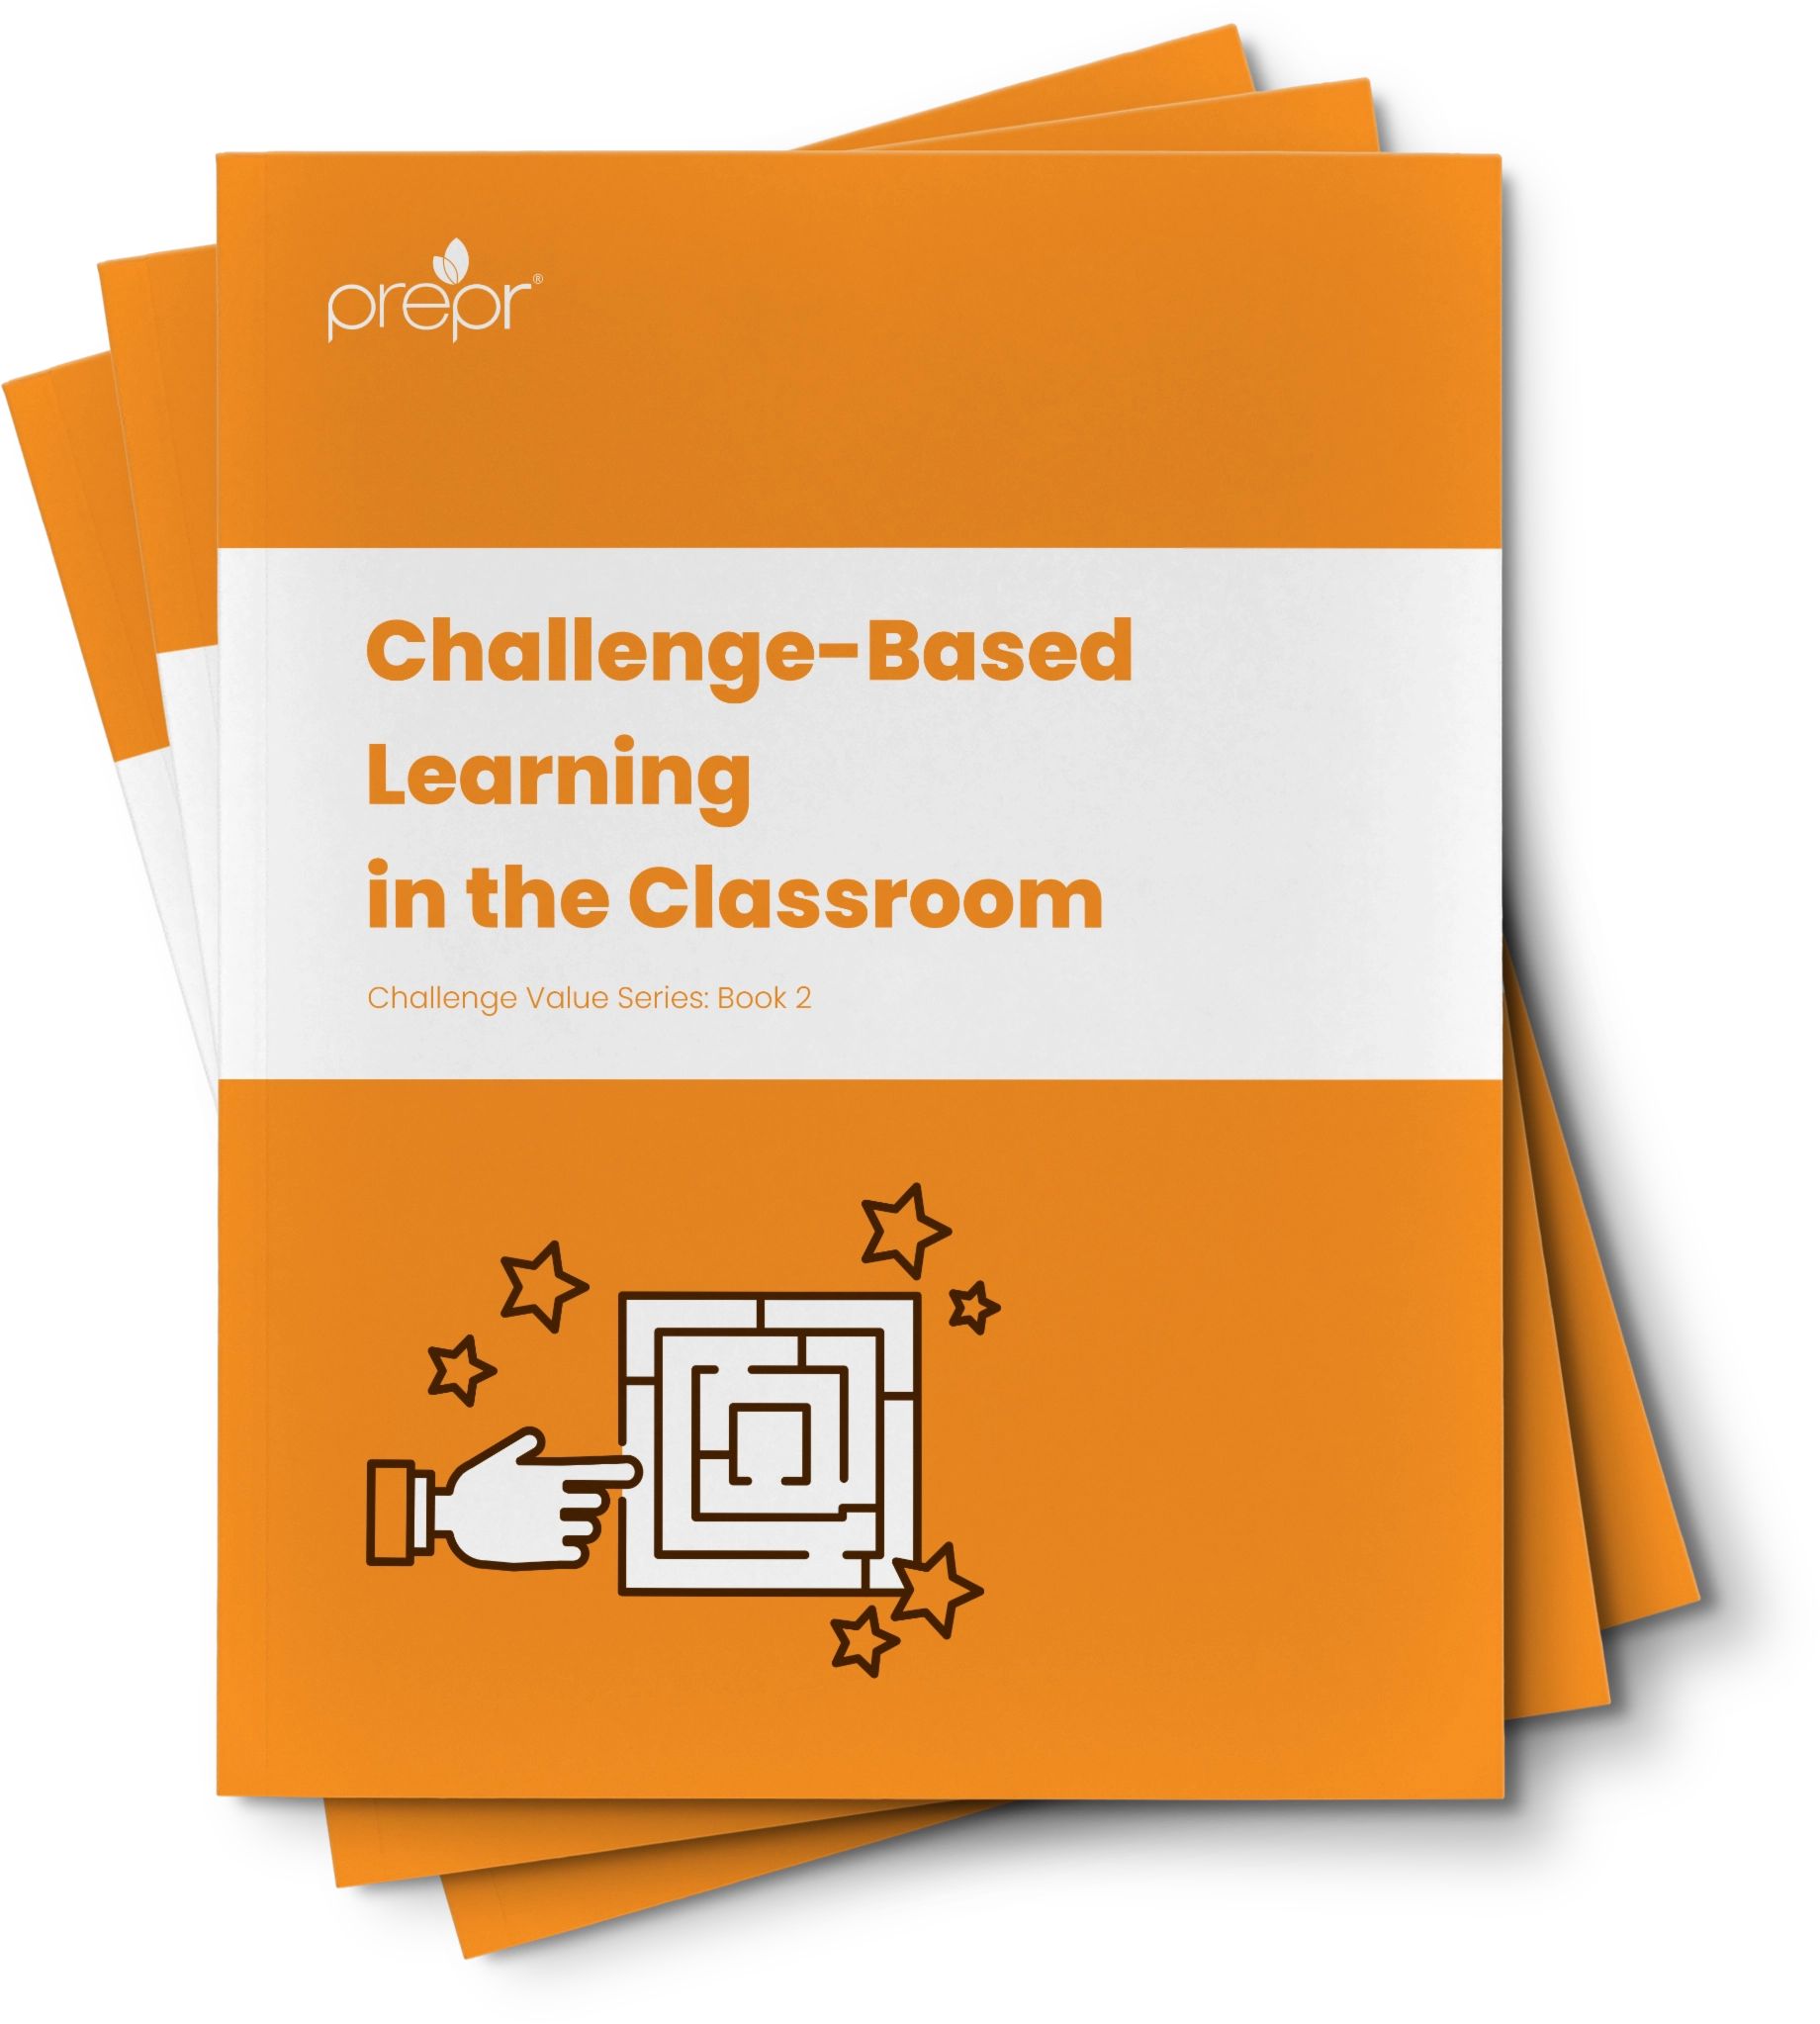 Cover photo: Challenge-Based Learning in the Classroom.